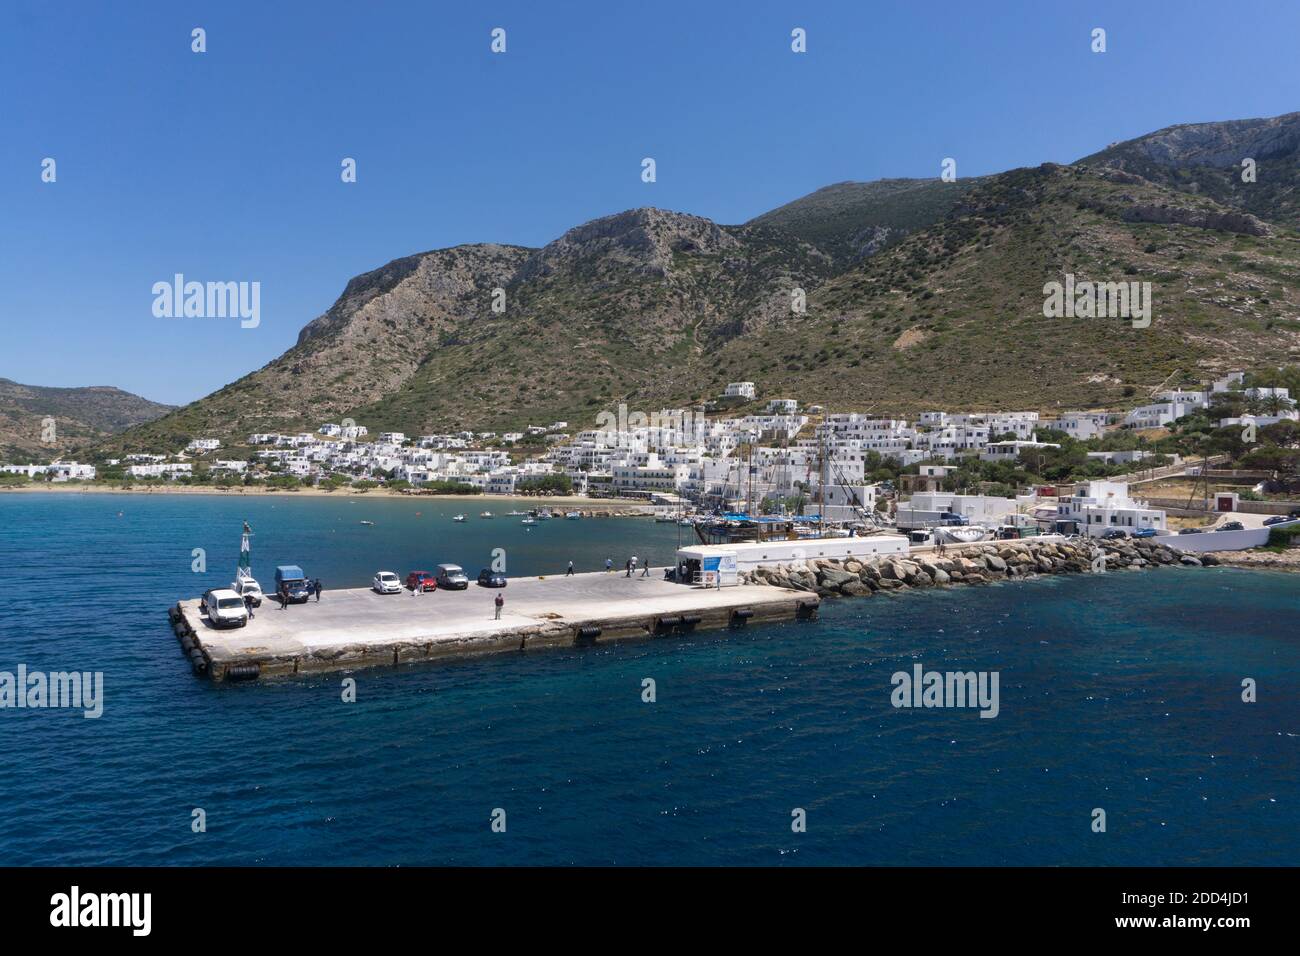 Sifnos belongs to the Cyclades islands group and sits in the heart of the Aegean sea, close to Milos and Serifos islands. Boasting the typical Cycladi Stock Photo